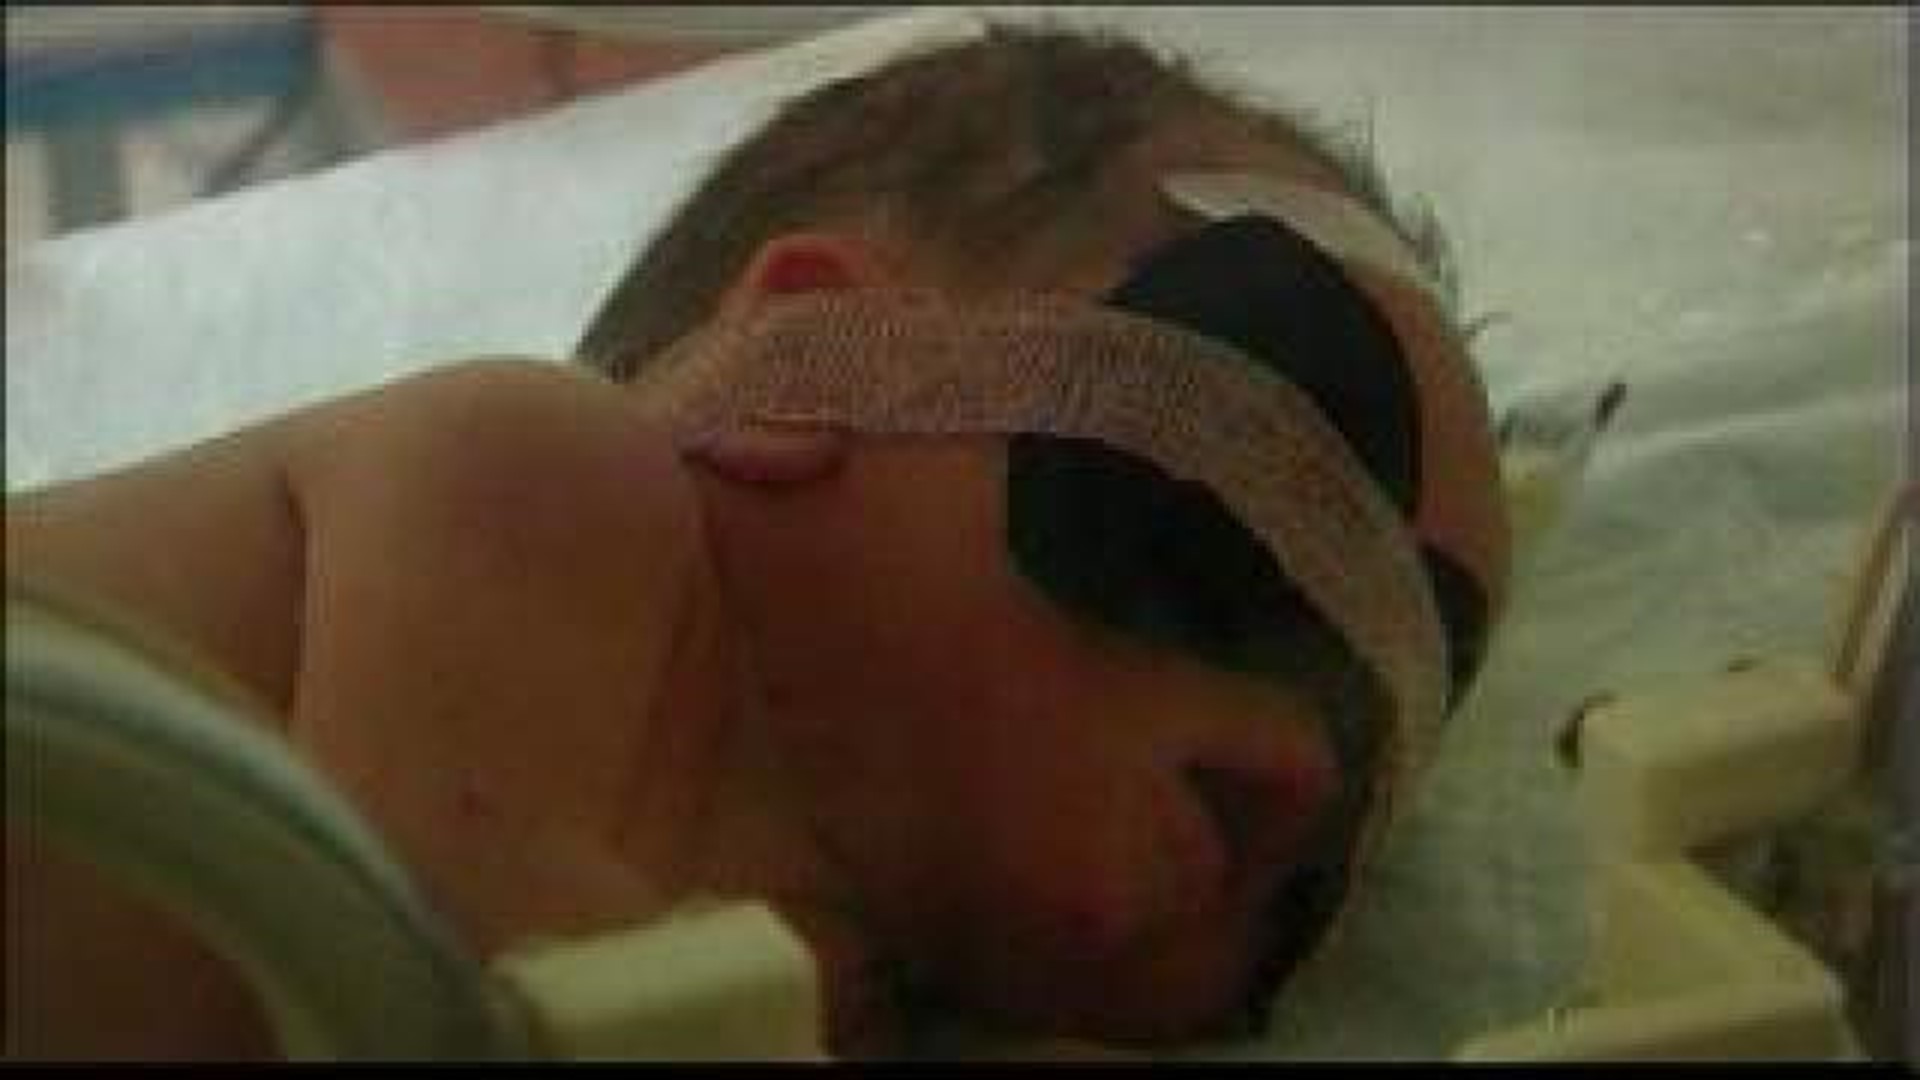 Newborn Recovering After Flushed Down Sewer Pipe